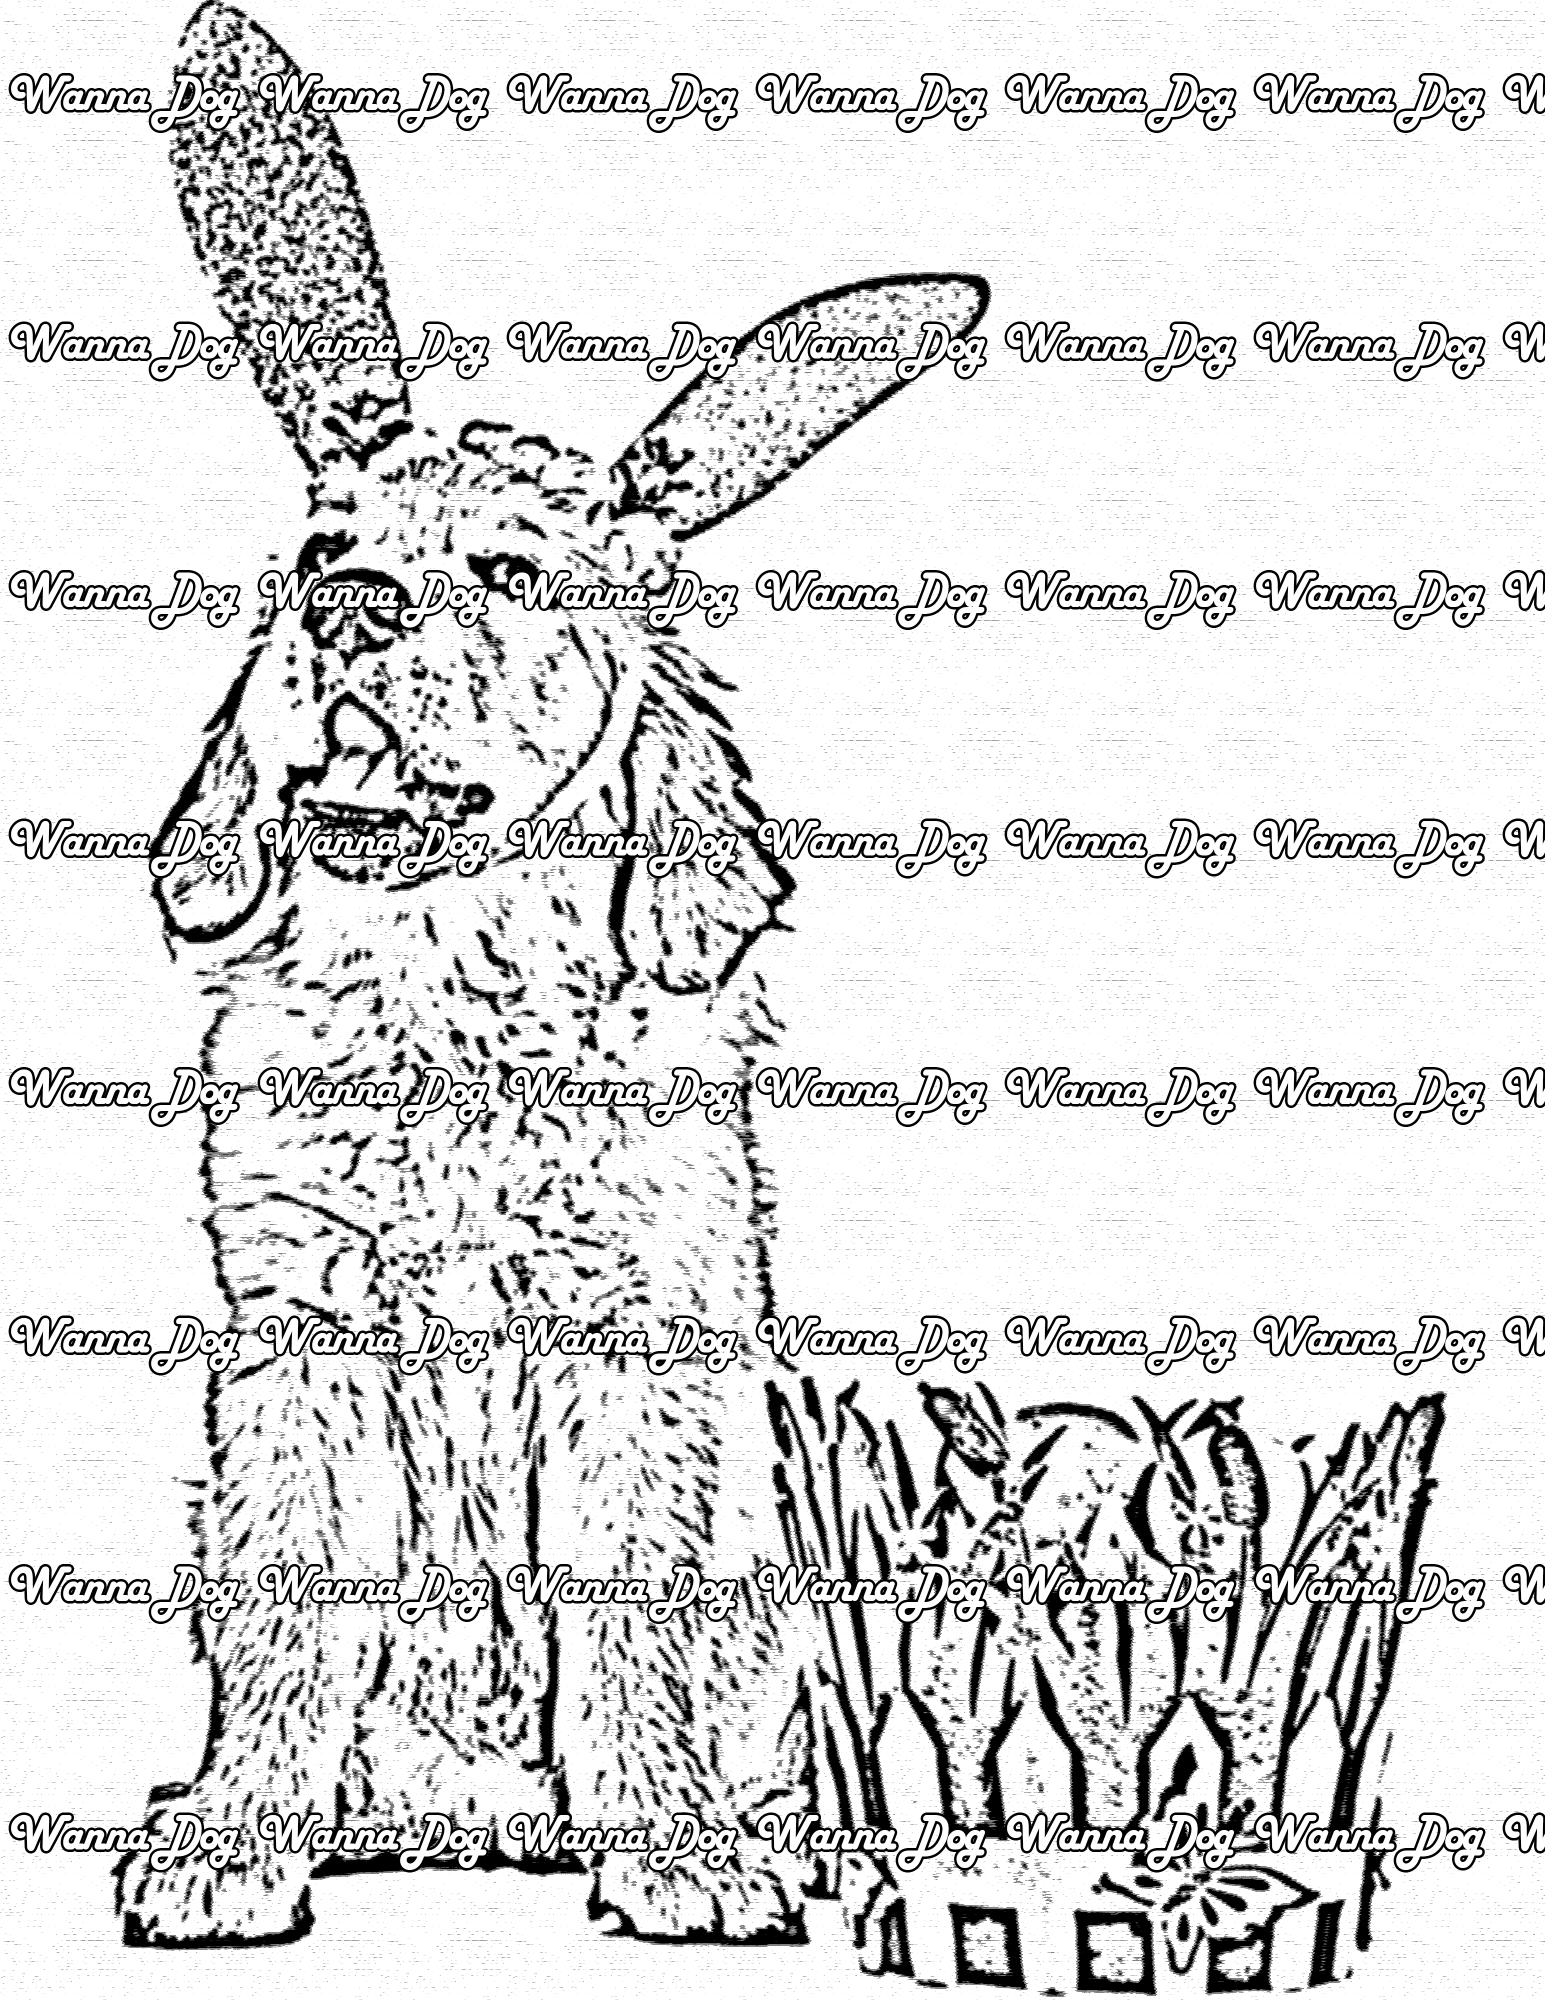 Golden Retriever Coloring Page of a Golden Retriever with bunny ears and an Easter basket